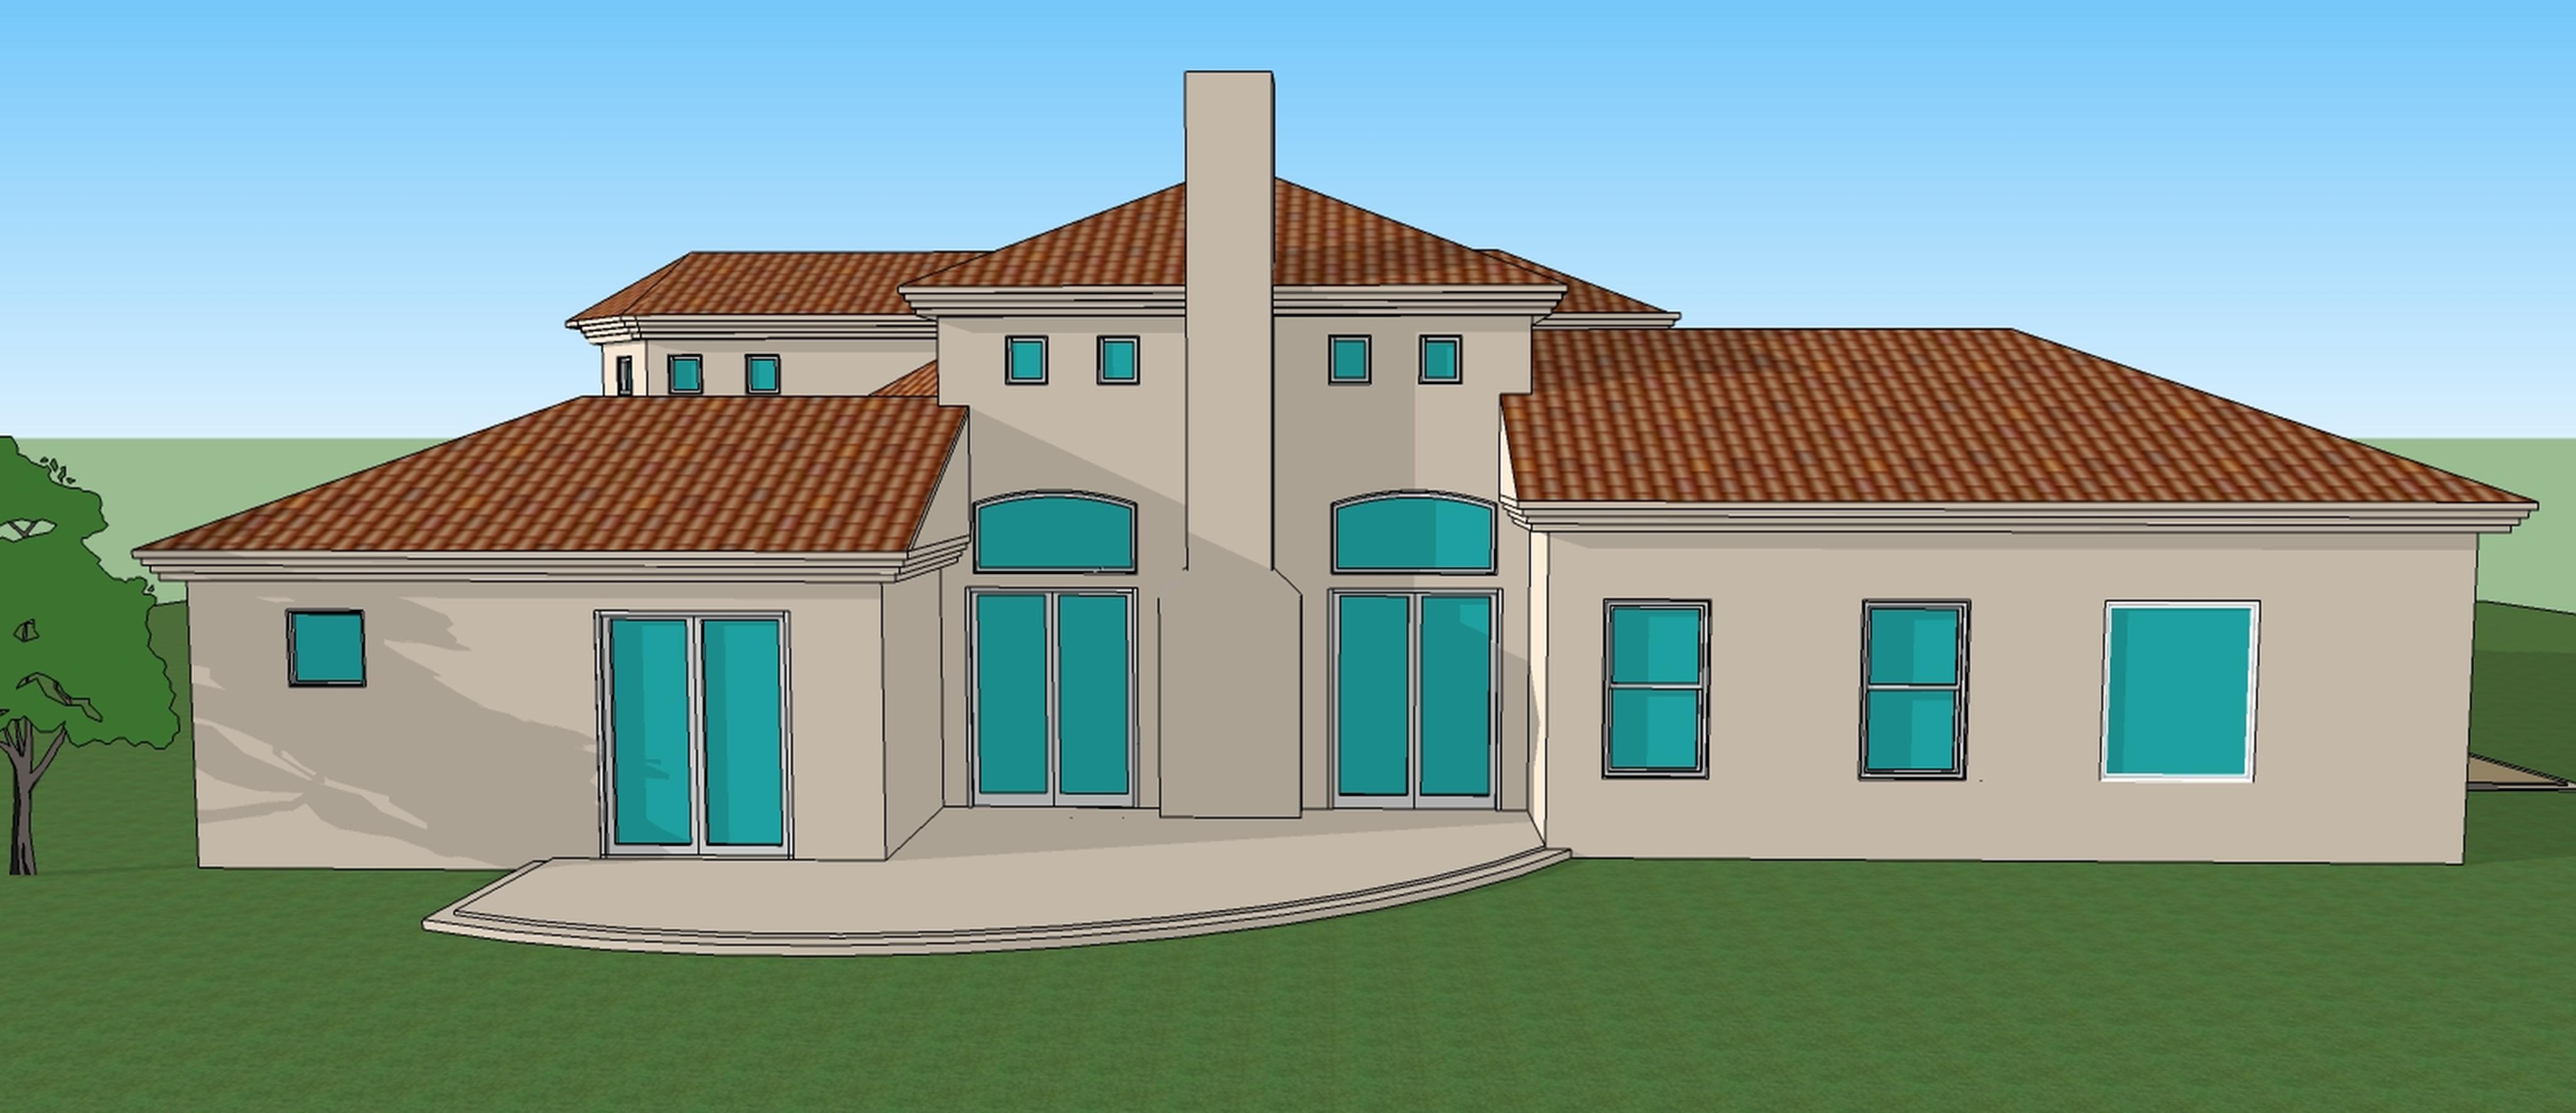 3d House Sketch at PaintingValley.com | Explore collection ...